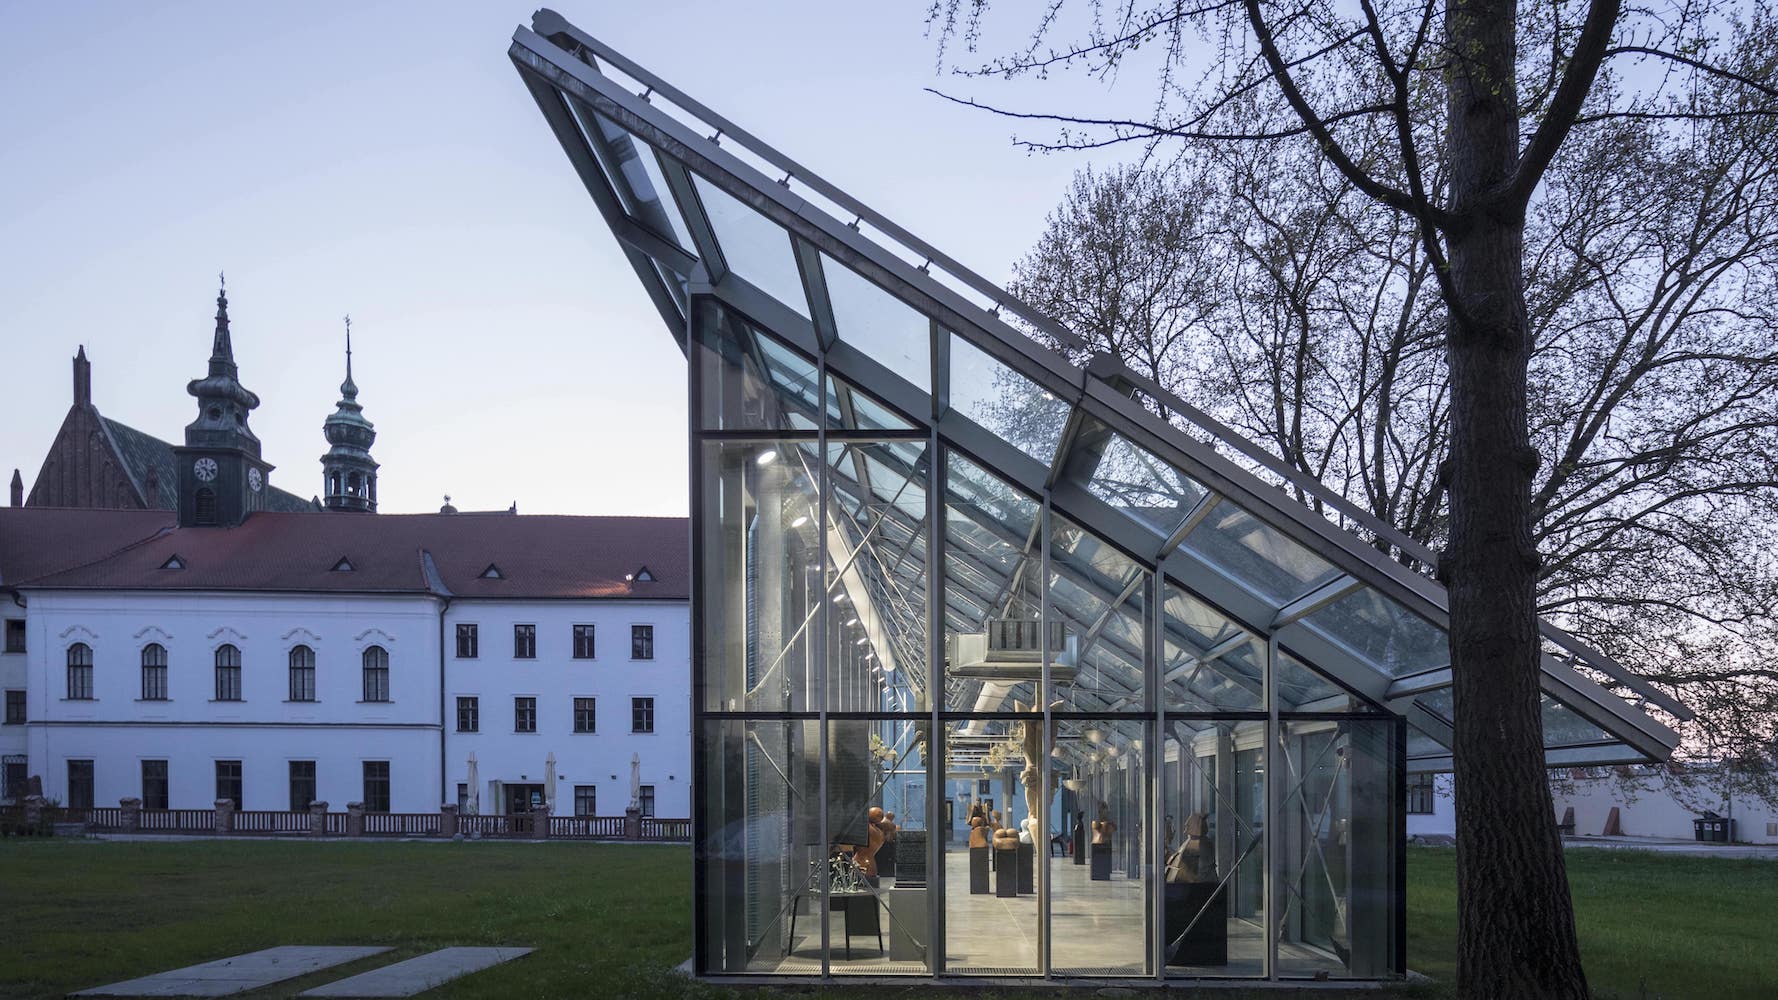 A Czech Monastery's Multi-Use Public Pavilion Pays Homage to the Architect of Modern Genetics